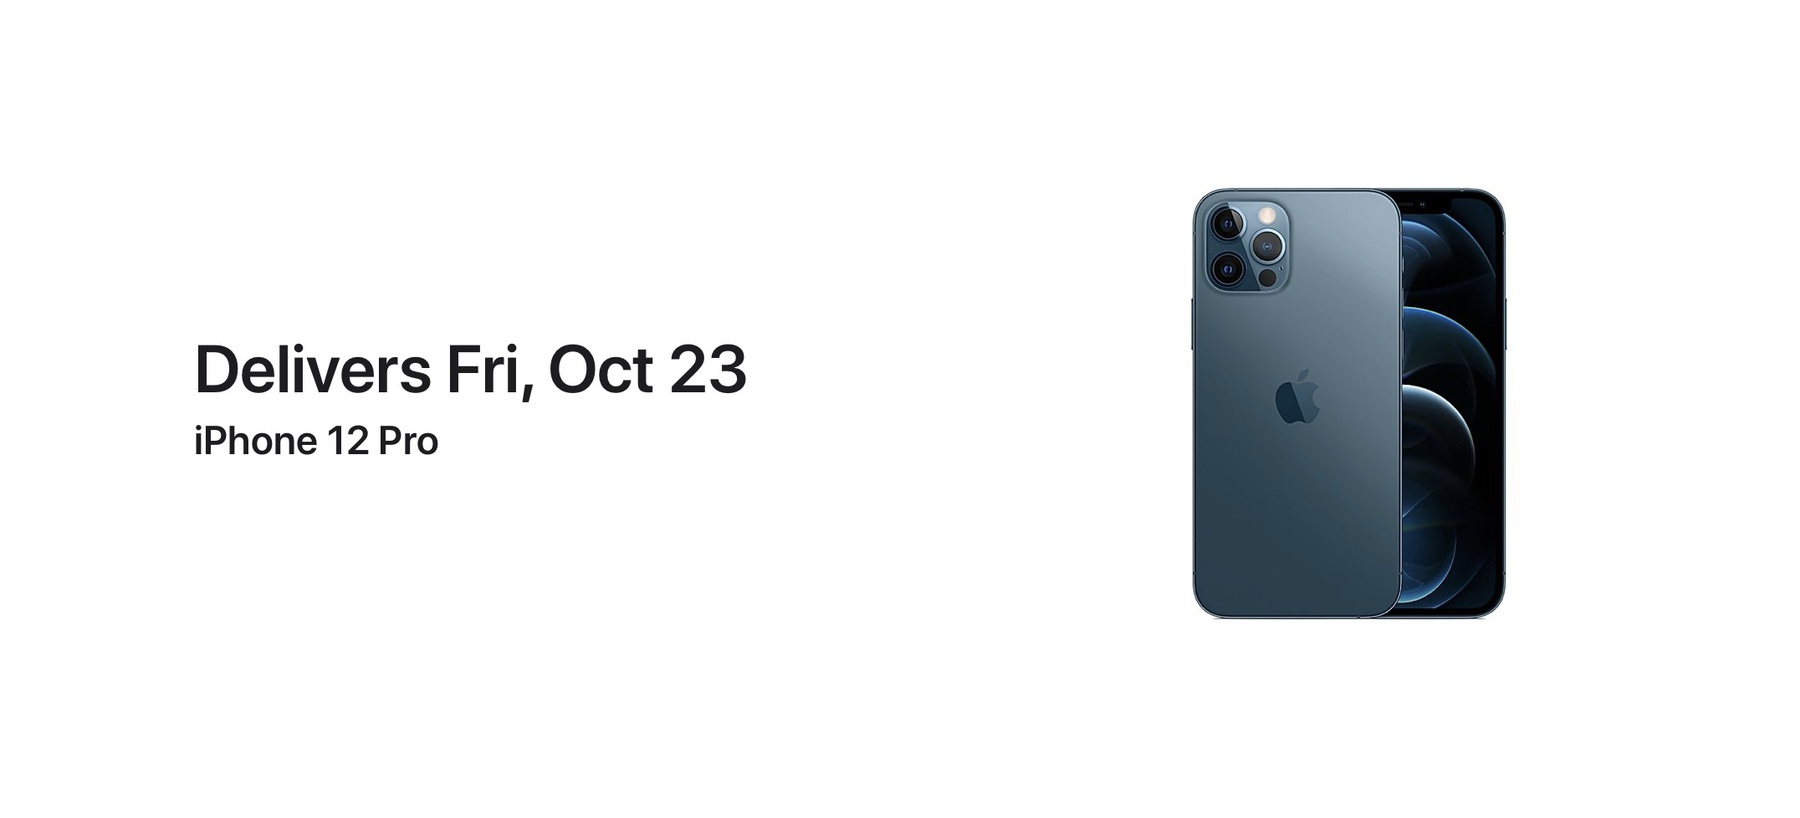 iPhone 12 Pro Delivers Fri, Oct 23